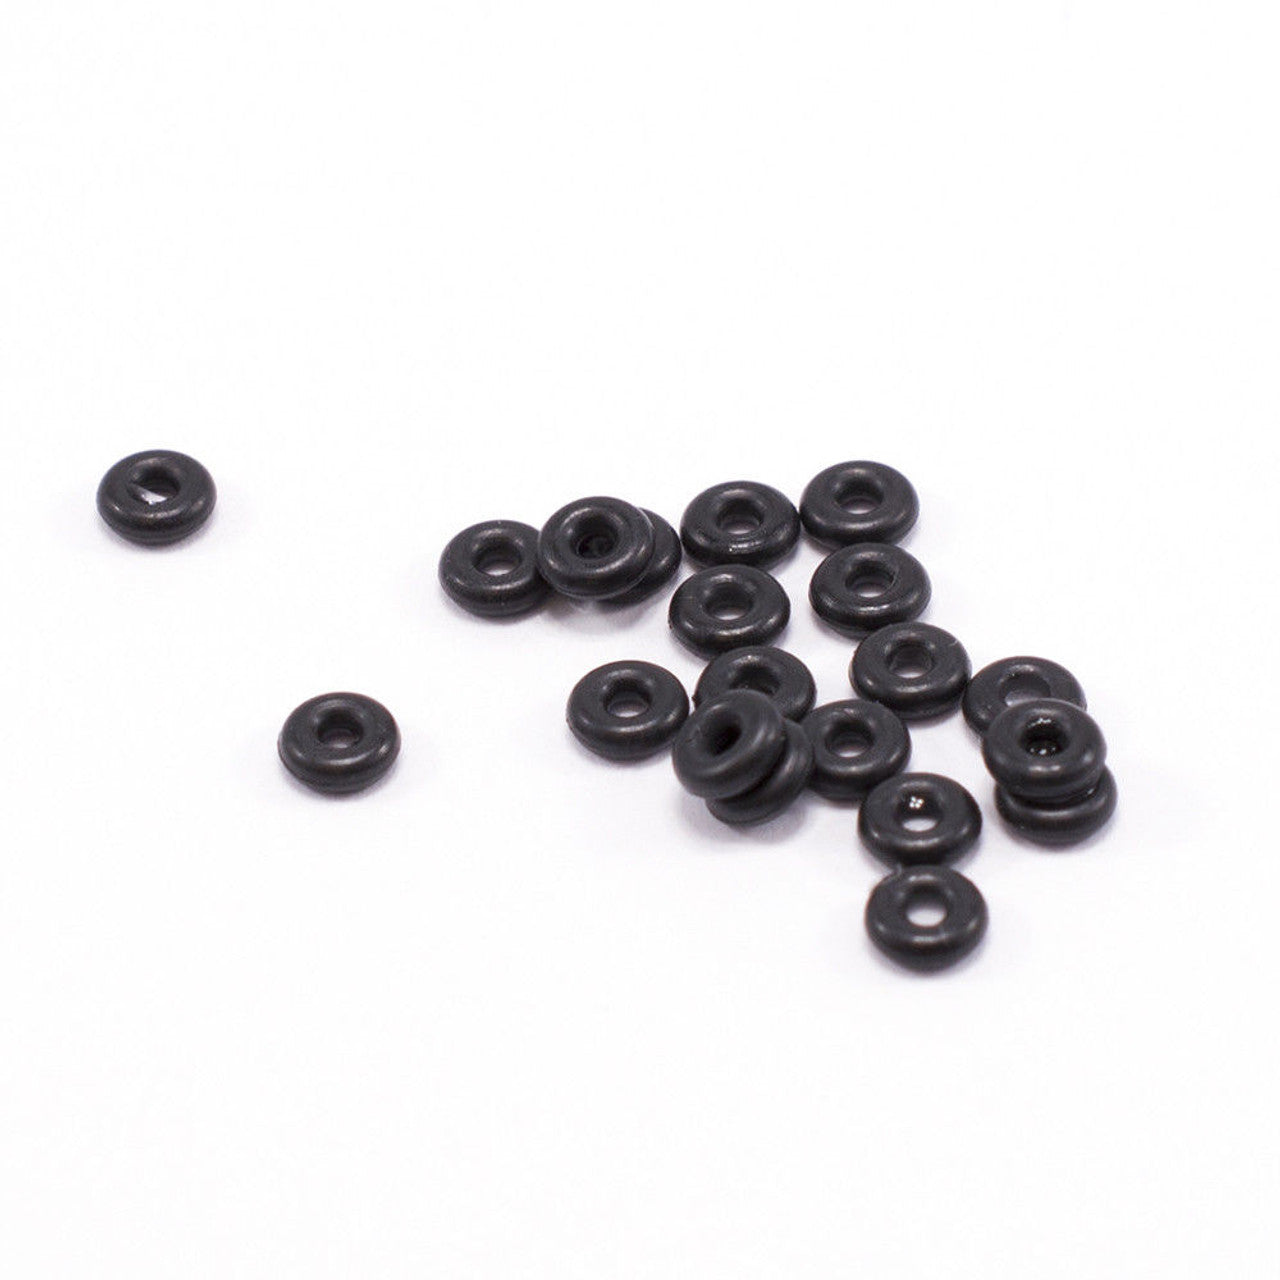 Replacement Black Rubber O-Rings 16 Gauge to 1/2" Gauge - 20 Pack